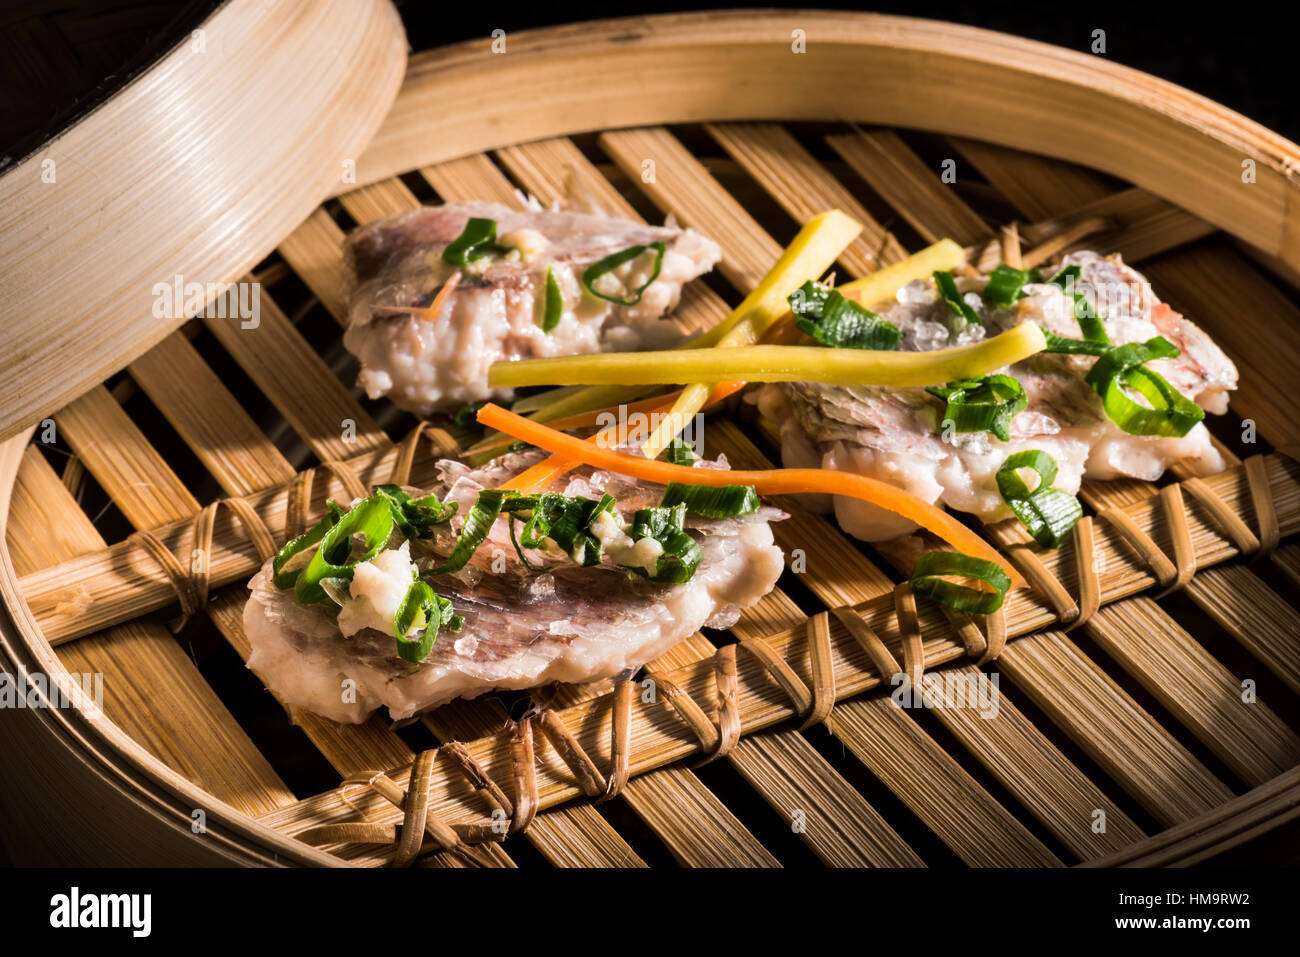 Fish fillet and vegetables steamed in Bamboosteamer Stock Photo